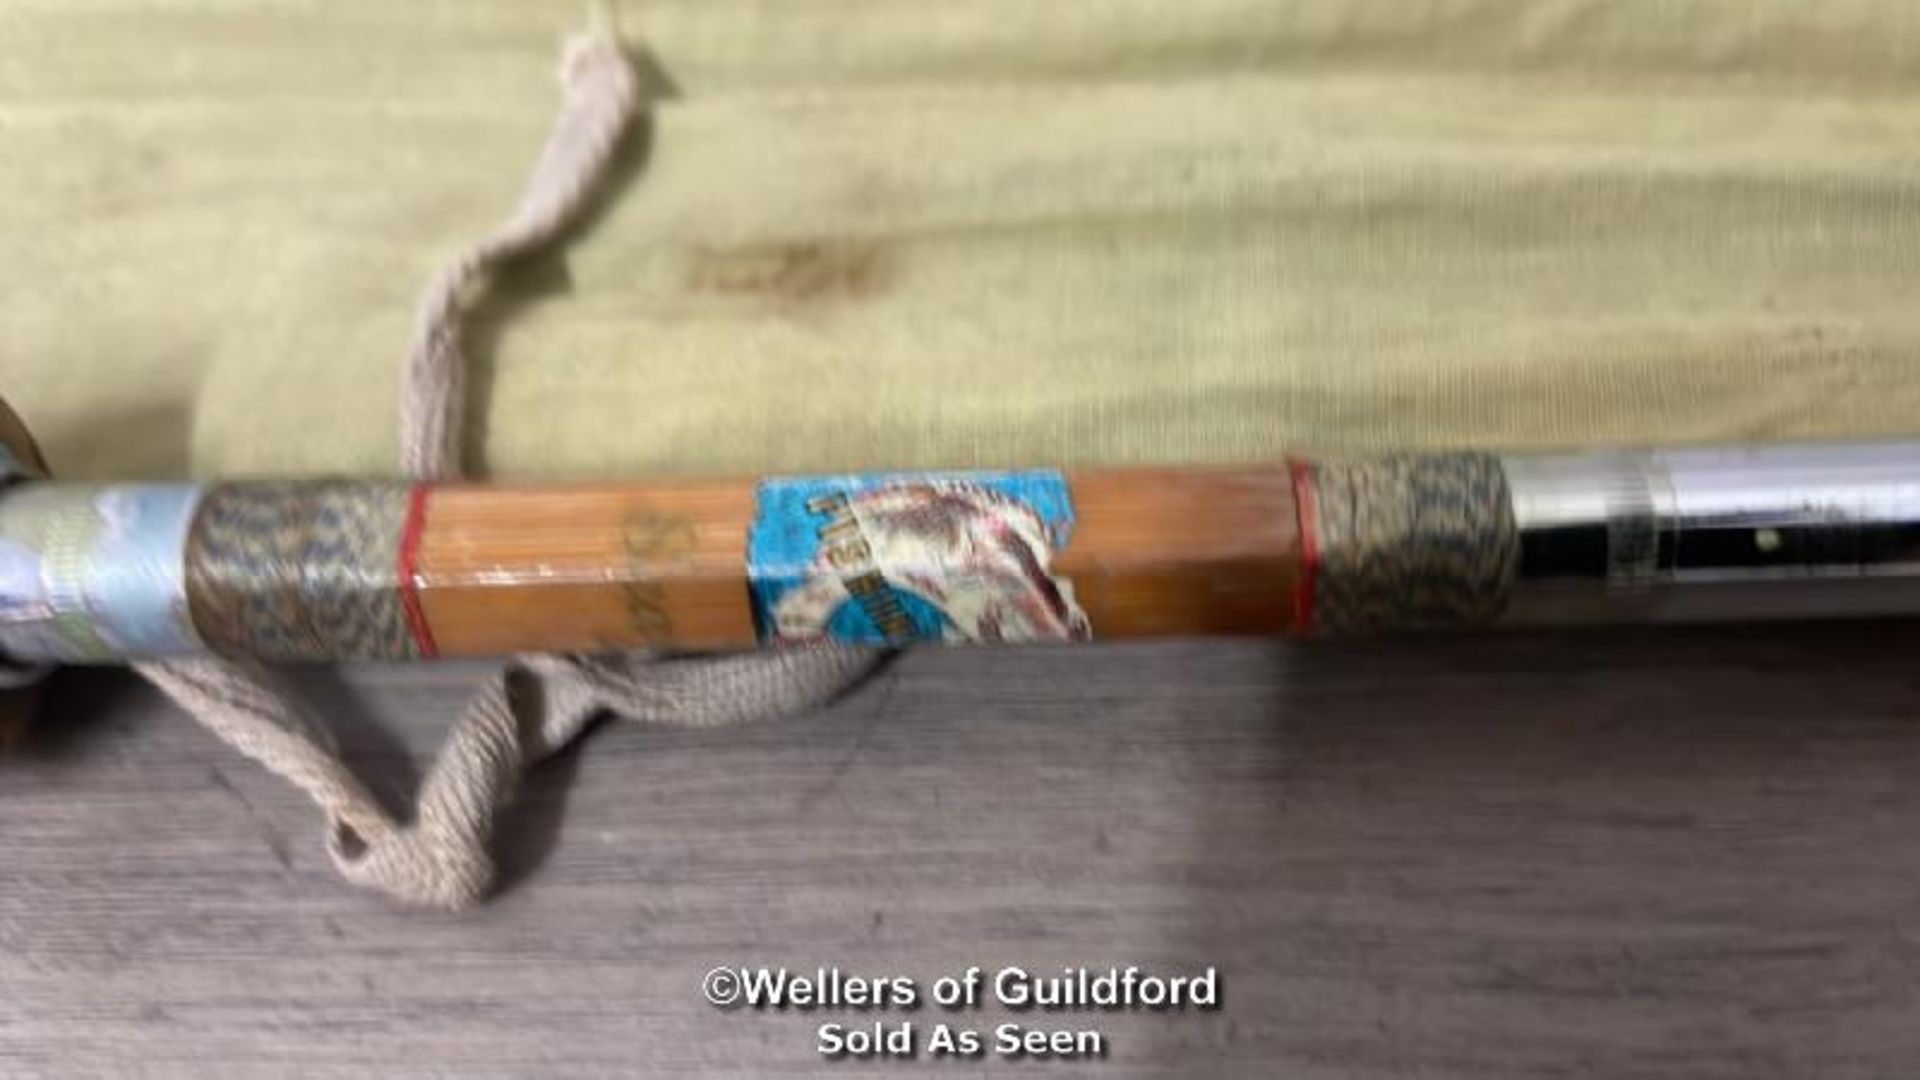 VINTAGE SEAGAME FISHING ROD - Image 2 of 5